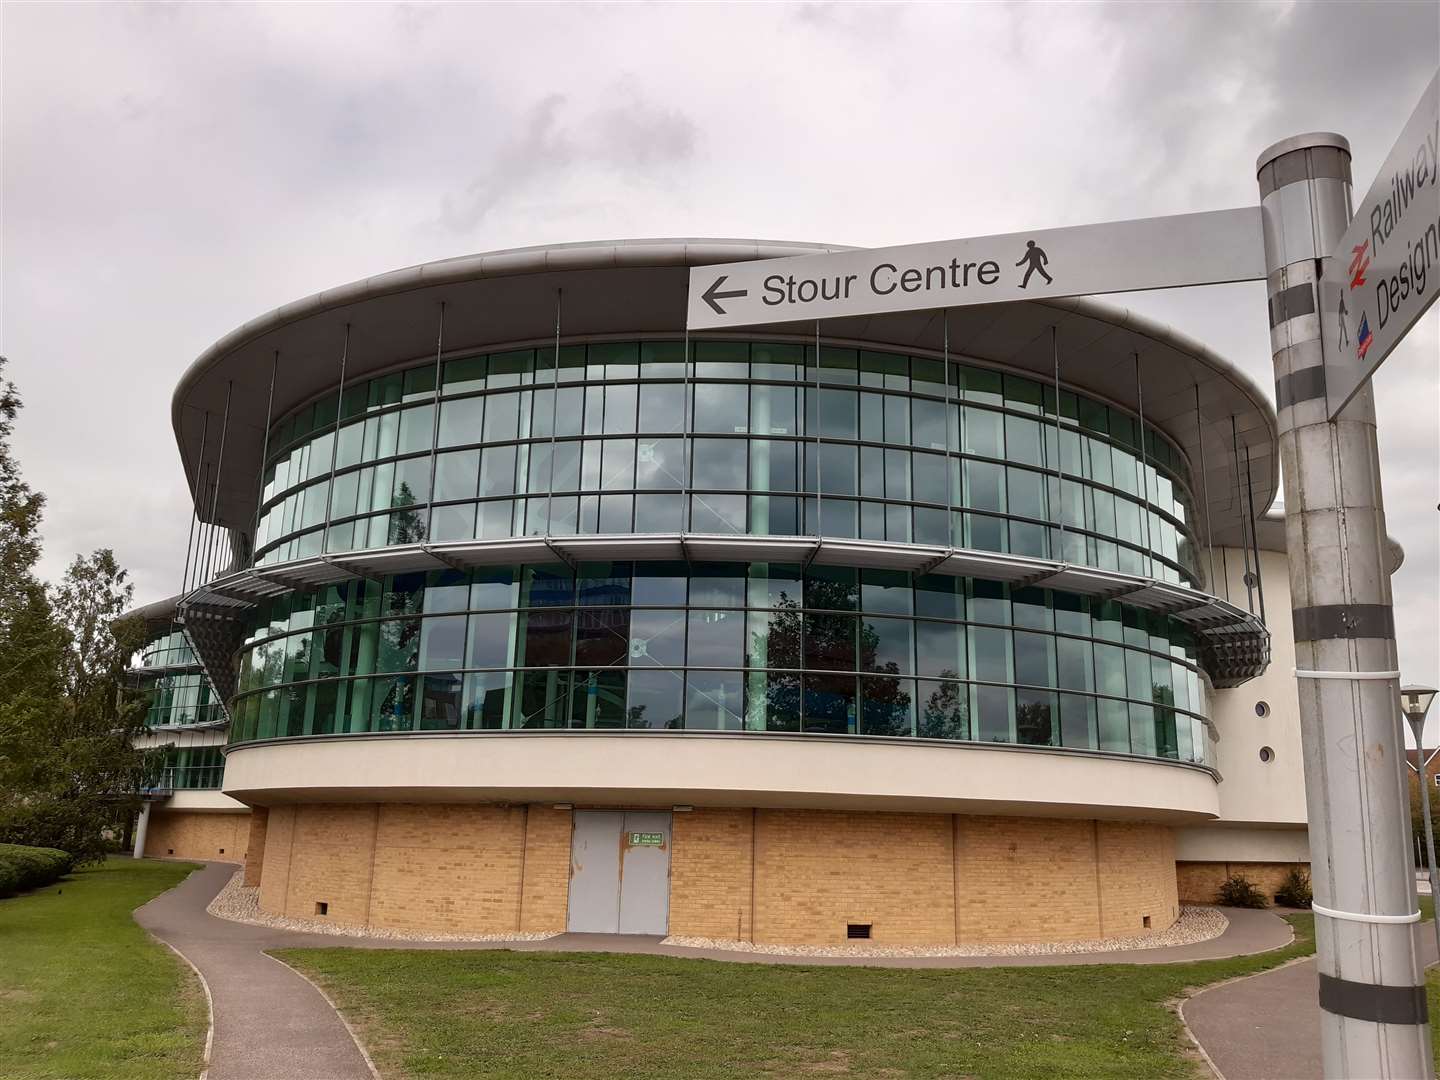 The Stour Centre in Ashford - home to the soft play area - was renovated in 2021